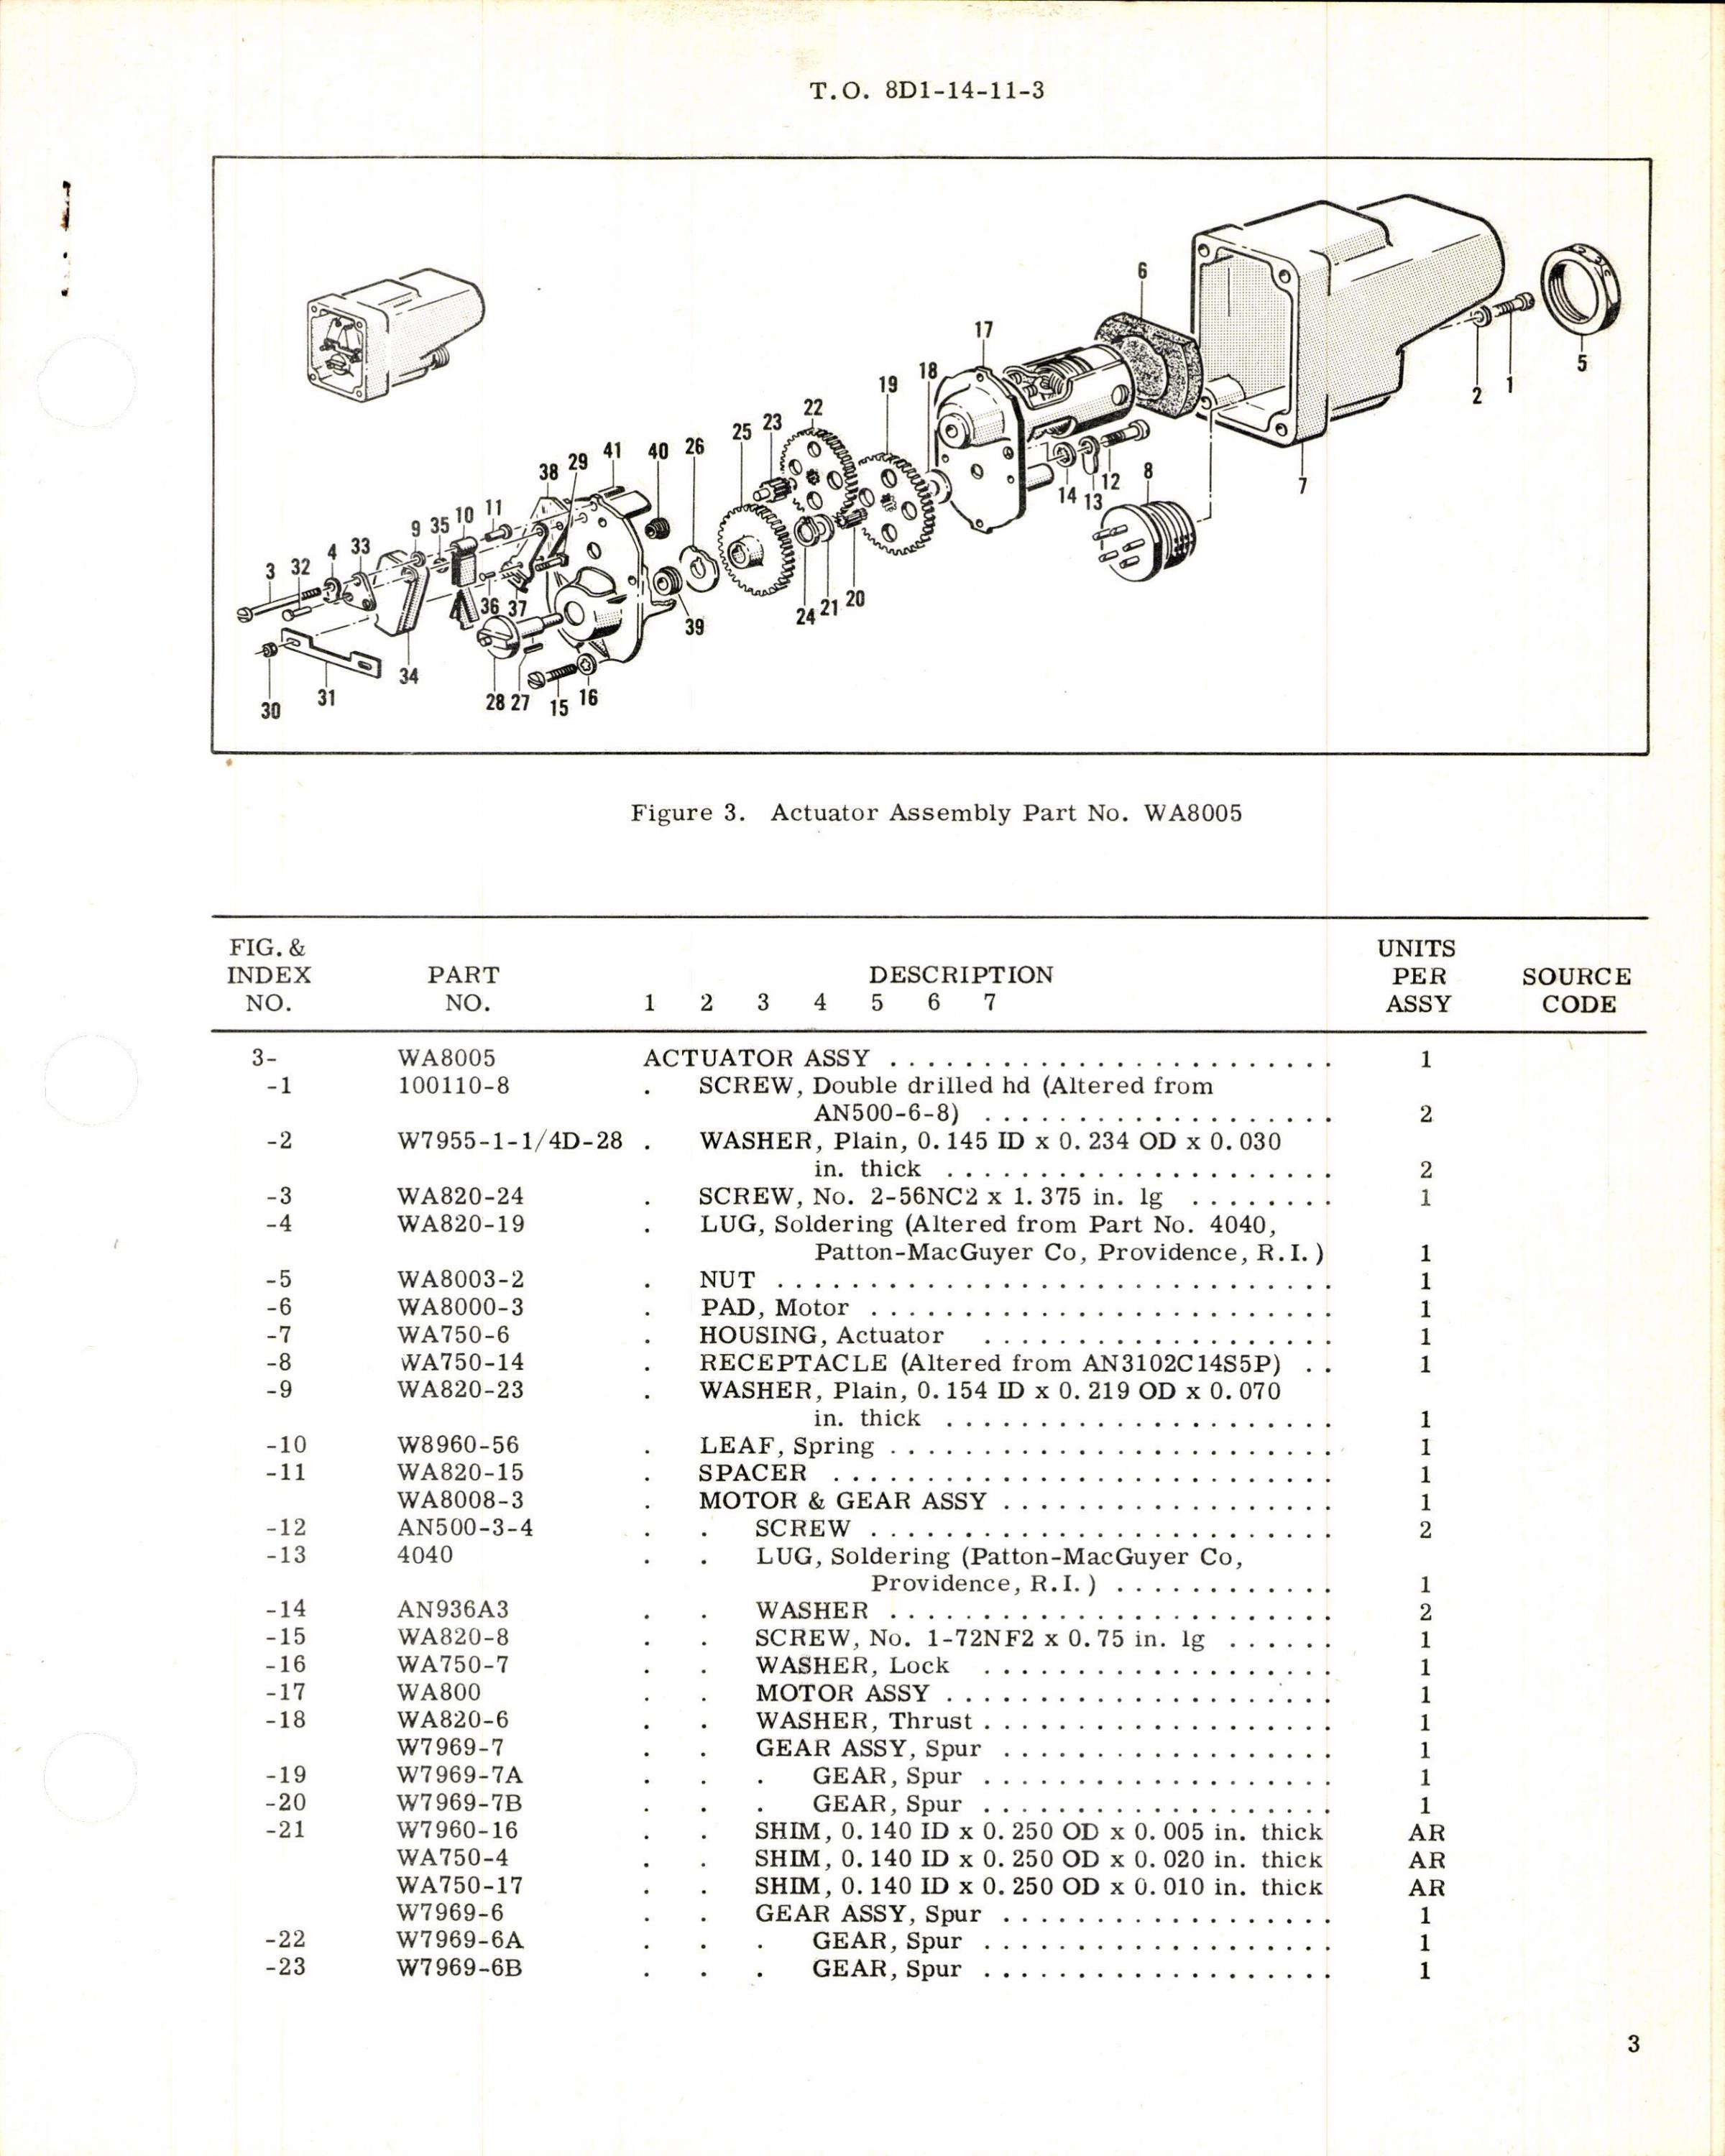 Sample page 3 from AirCorps Library document: Instructions w Parts Breakdown for Actuator Assembly Part WA8005